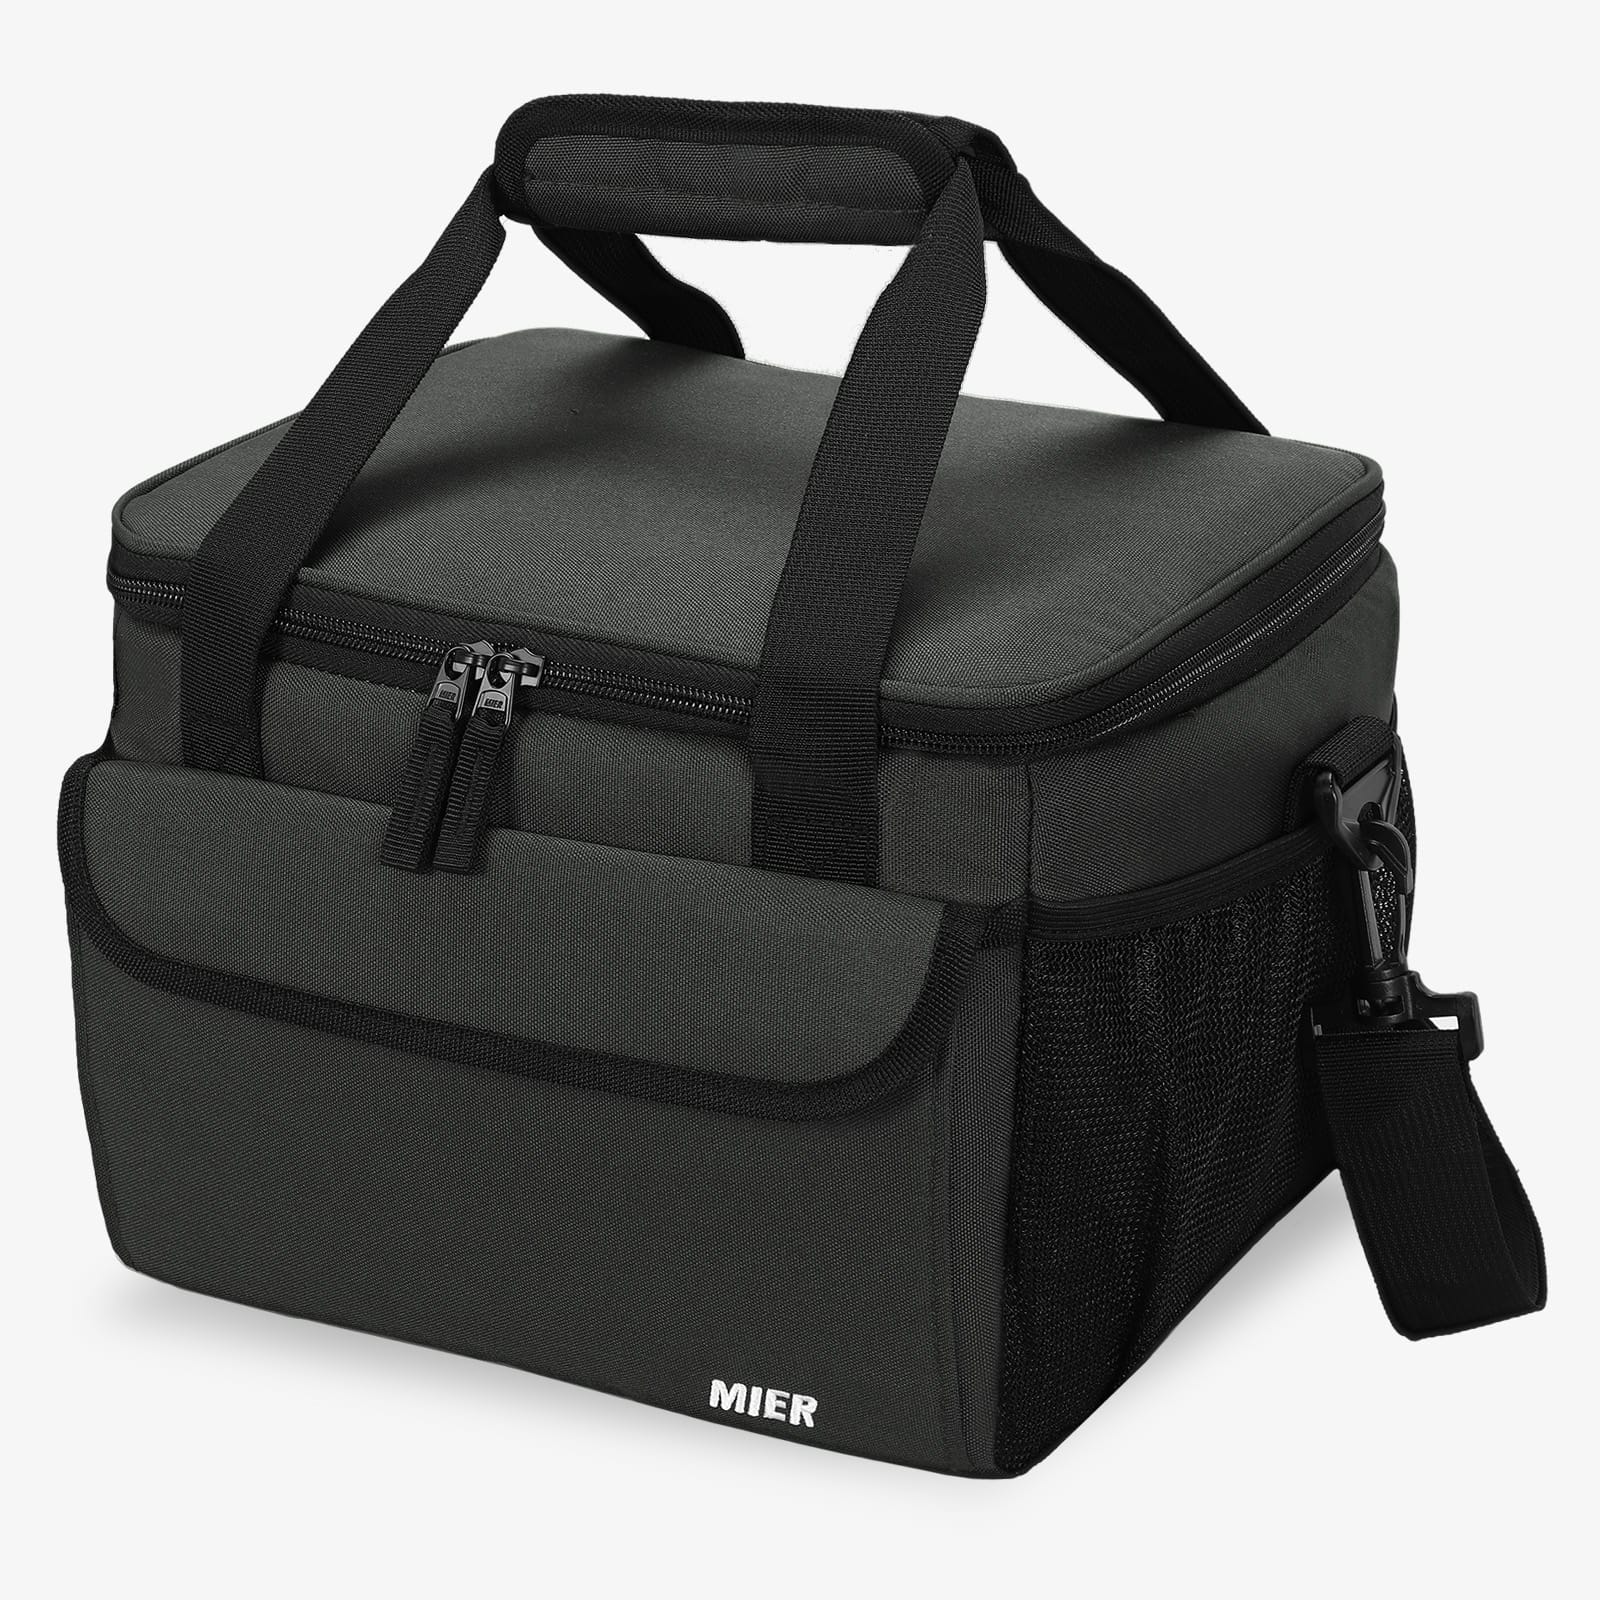 MIER Large Lunch Box for Men Insulated Lunch Bags, Gray